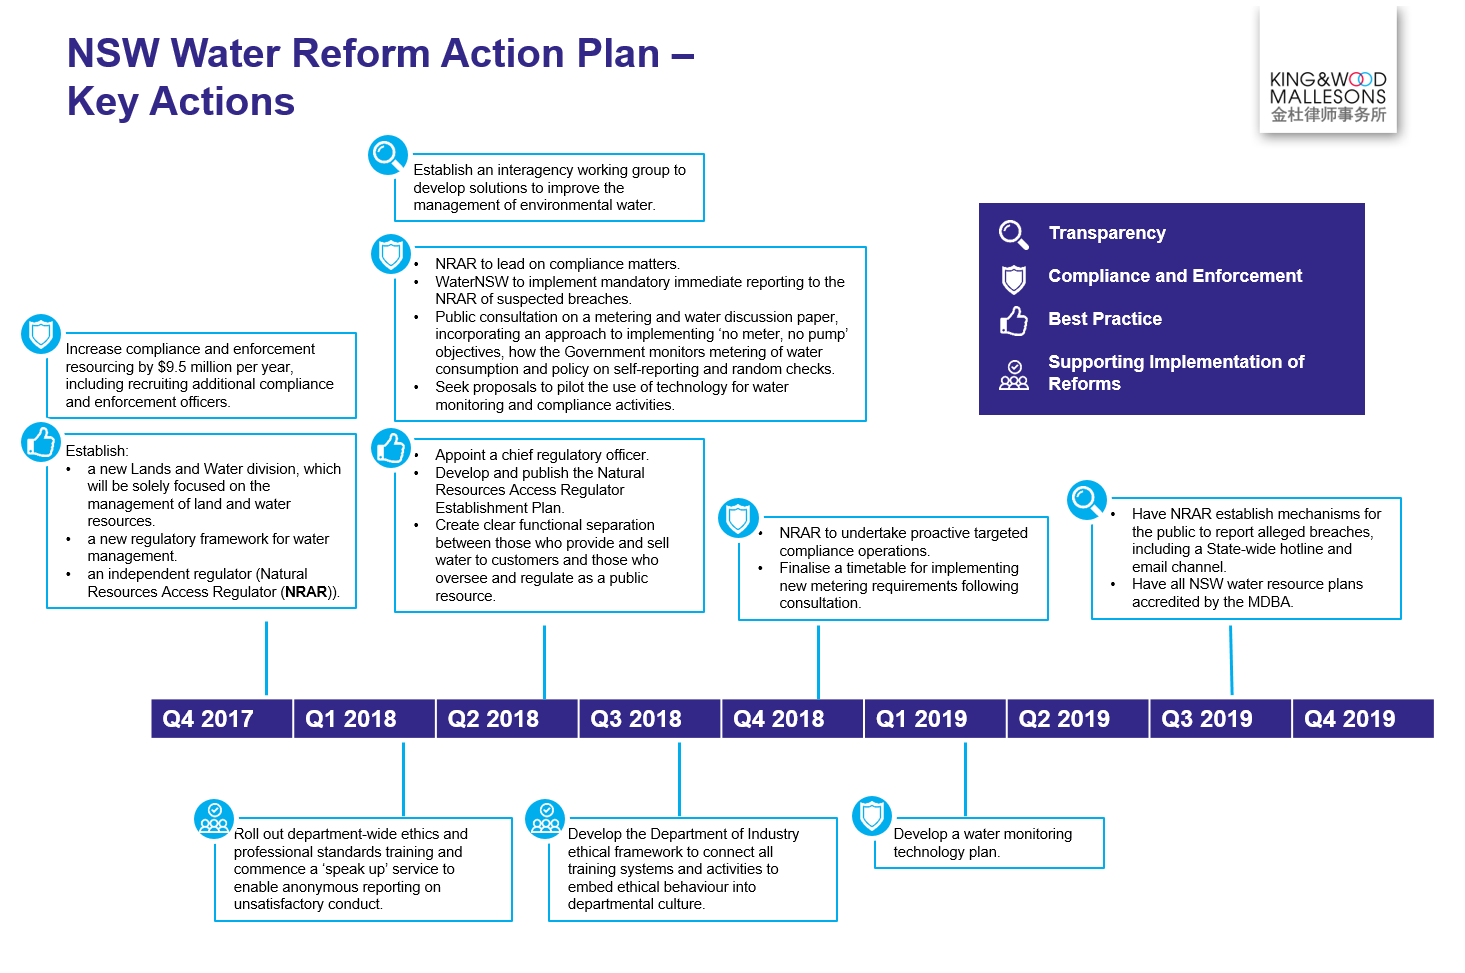 NSW Water Reform Action Plan - Key Actions